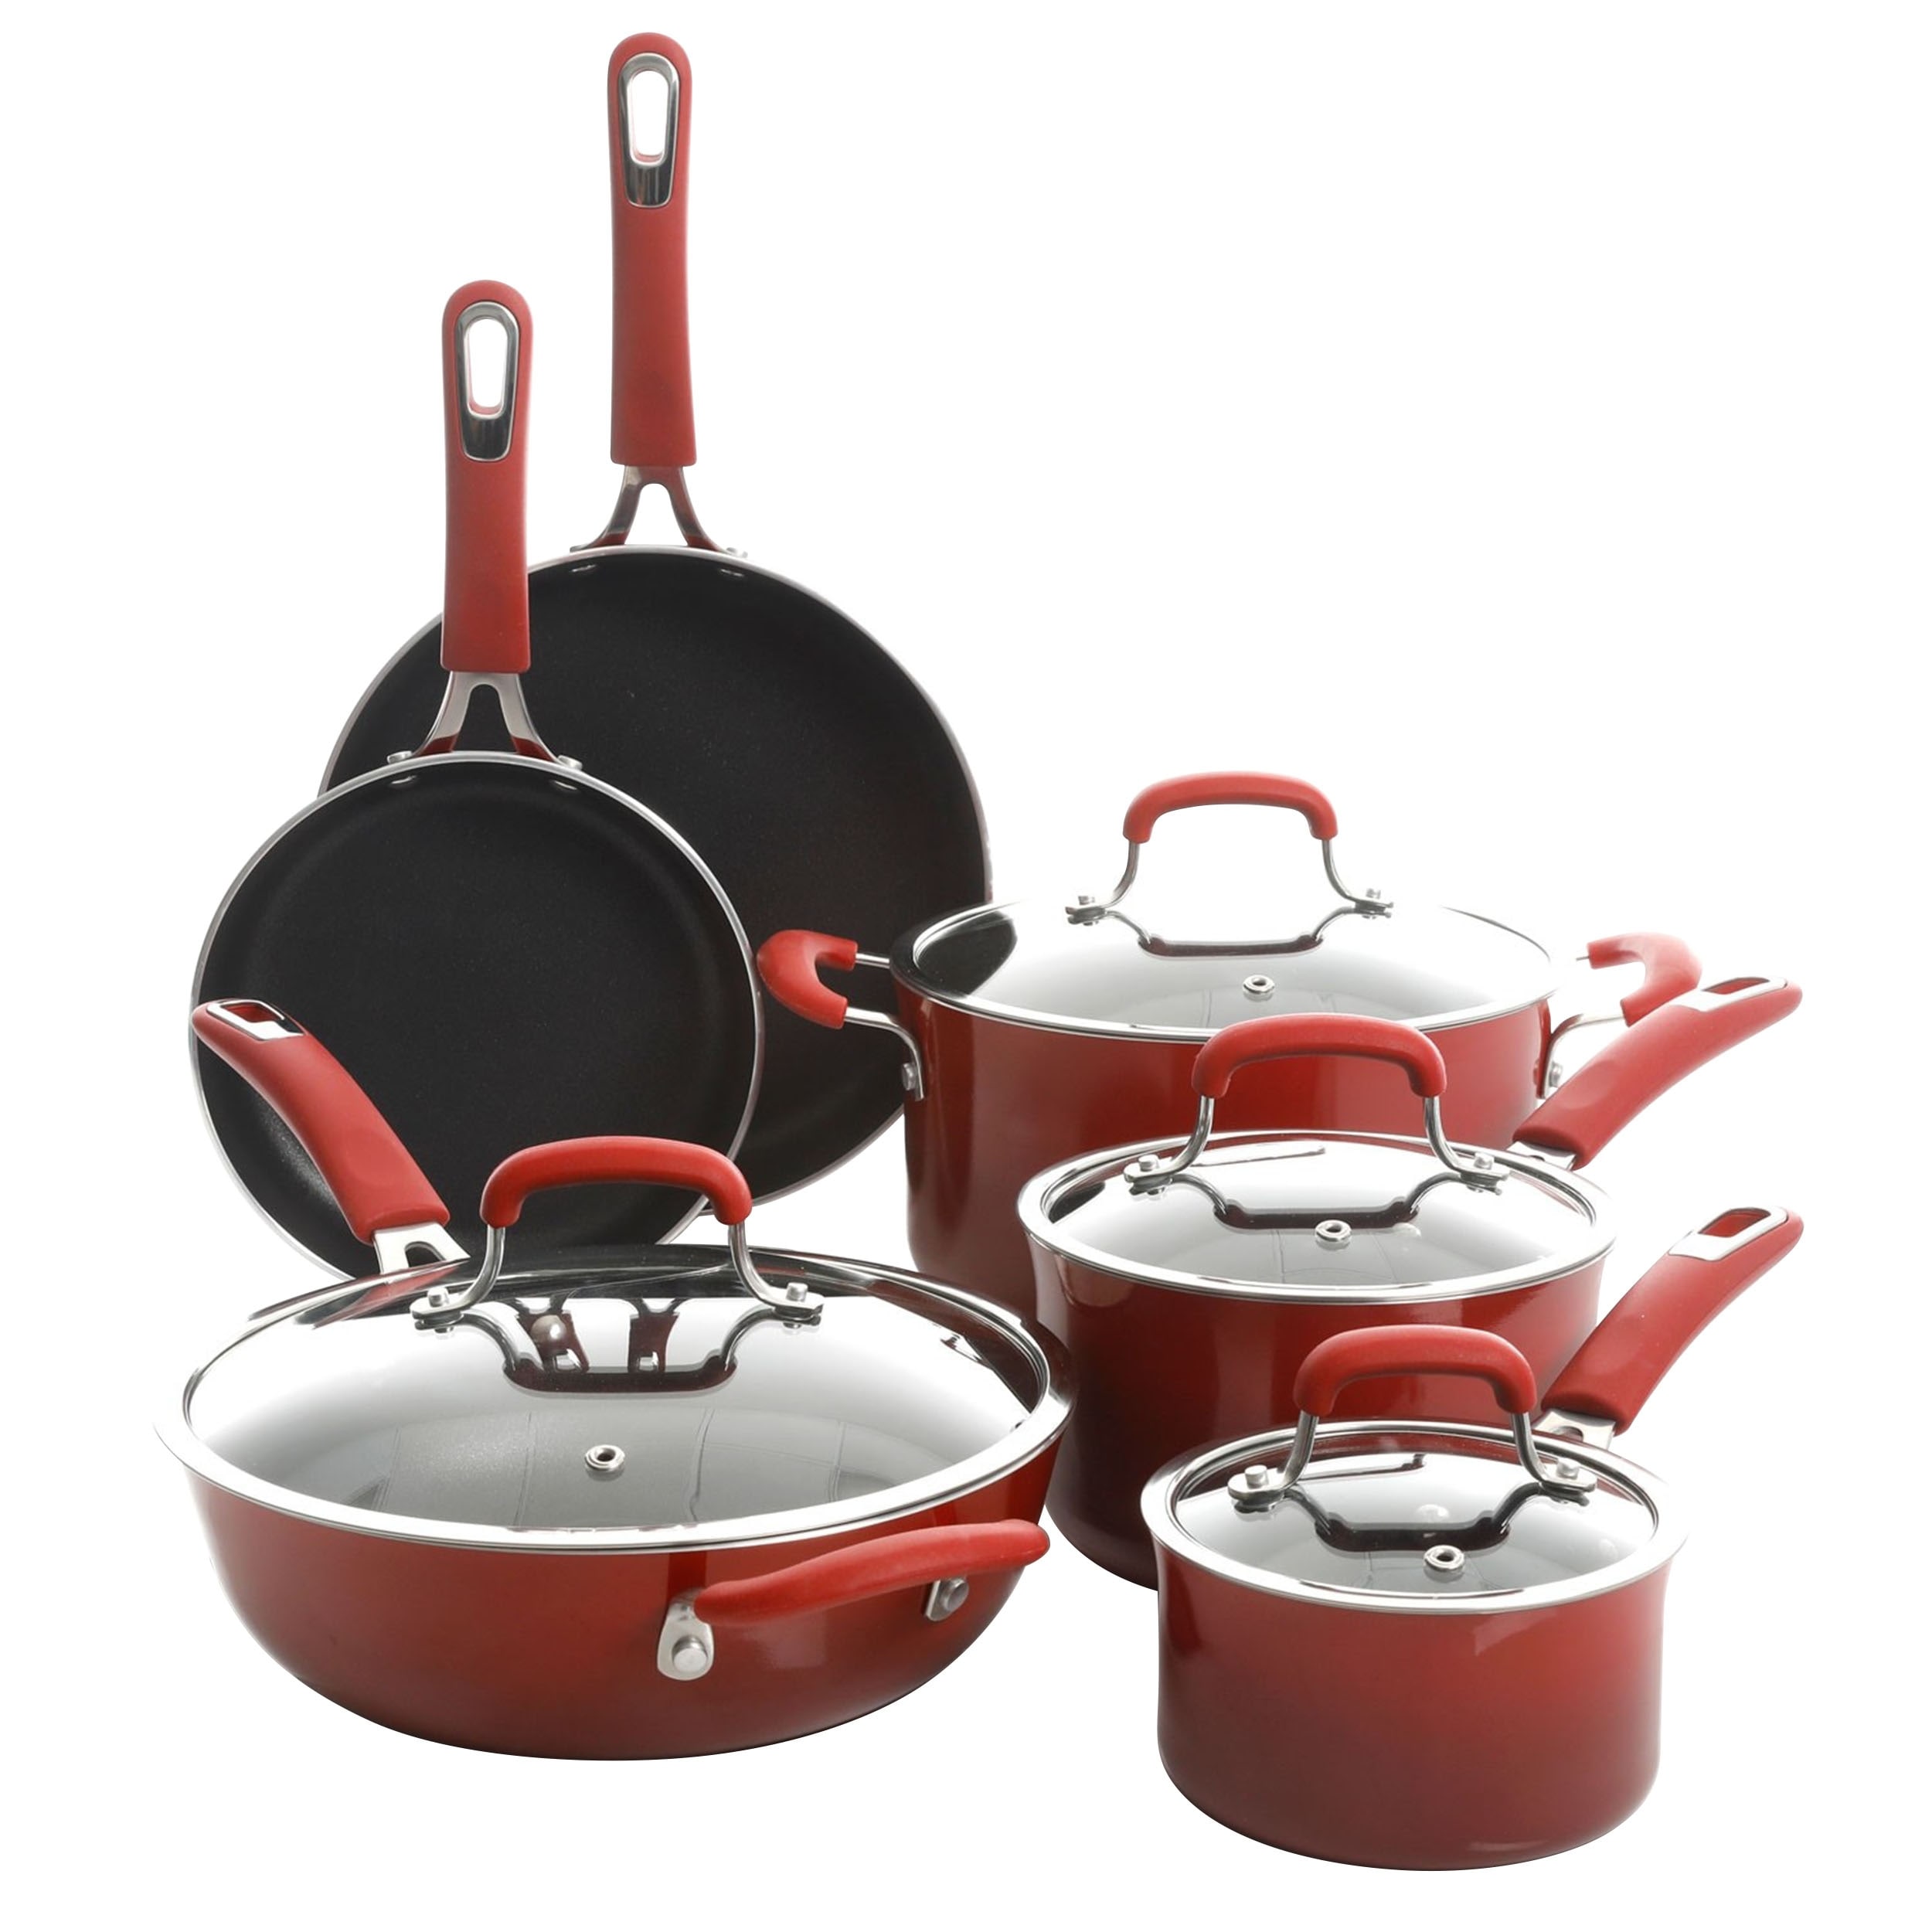 https://ak1.ostkcdn.com/images/products/is/images/direct/694561e33e762bf16d24aca22bbf9e117d551f19/Nonstick-Aluminum-Cookware-10-Piece-Set-in-Ruby-Ombre.jpg